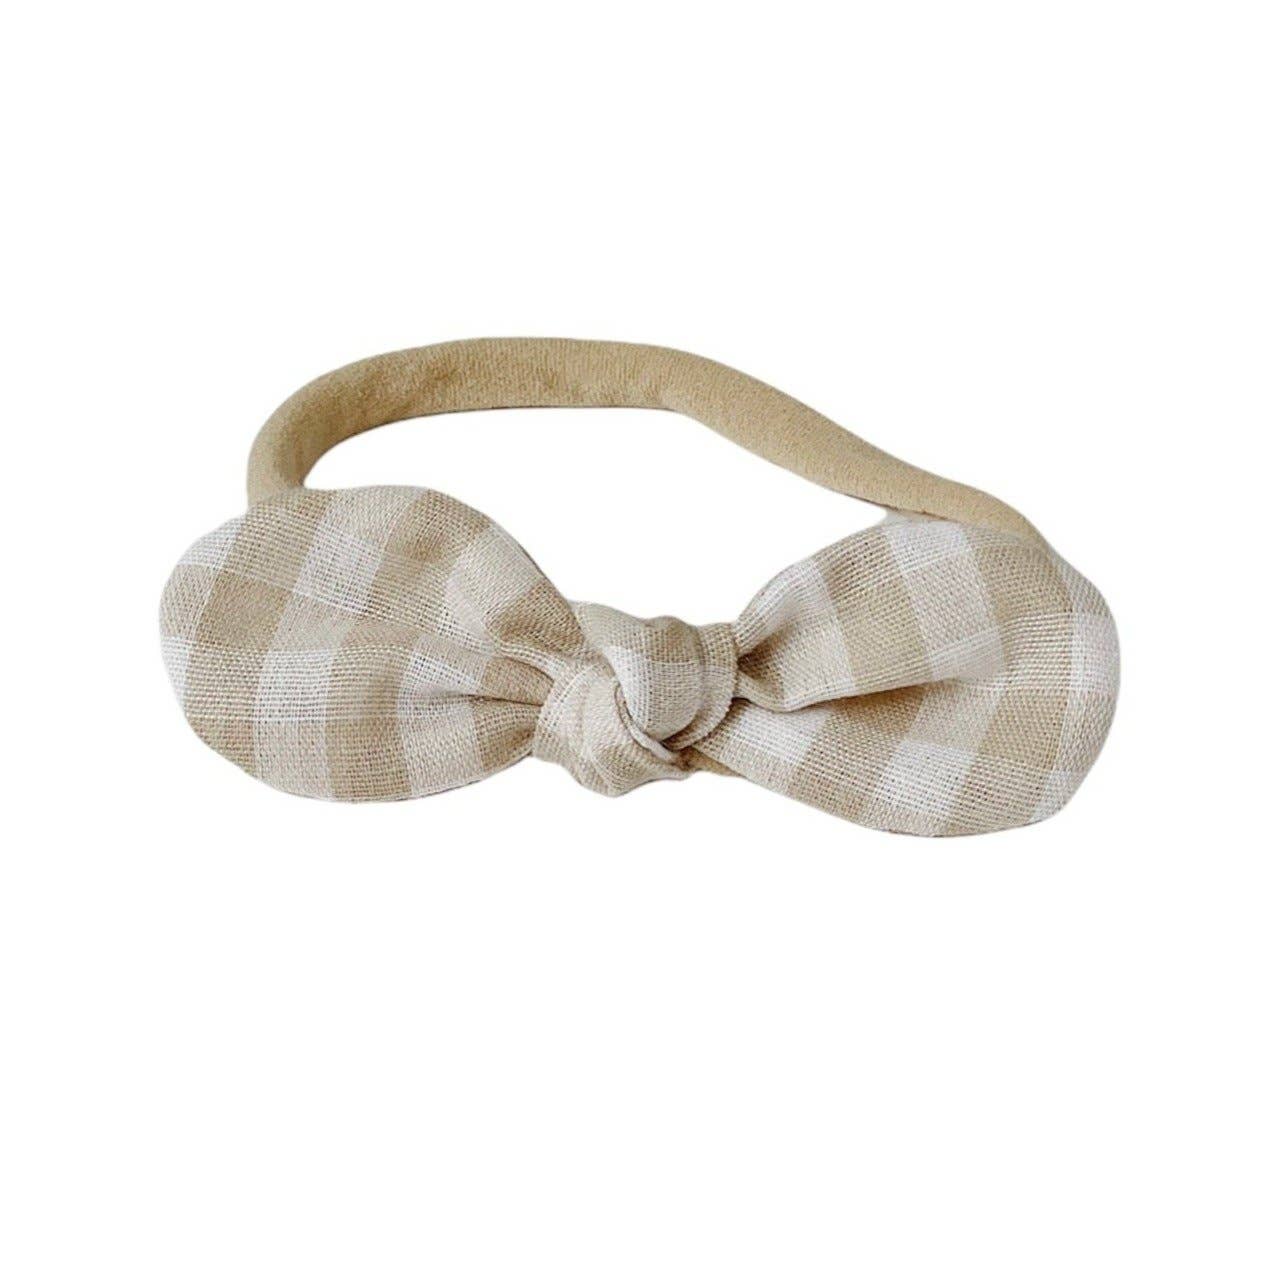 Limited Edition Hair Bow - Tan Gingham